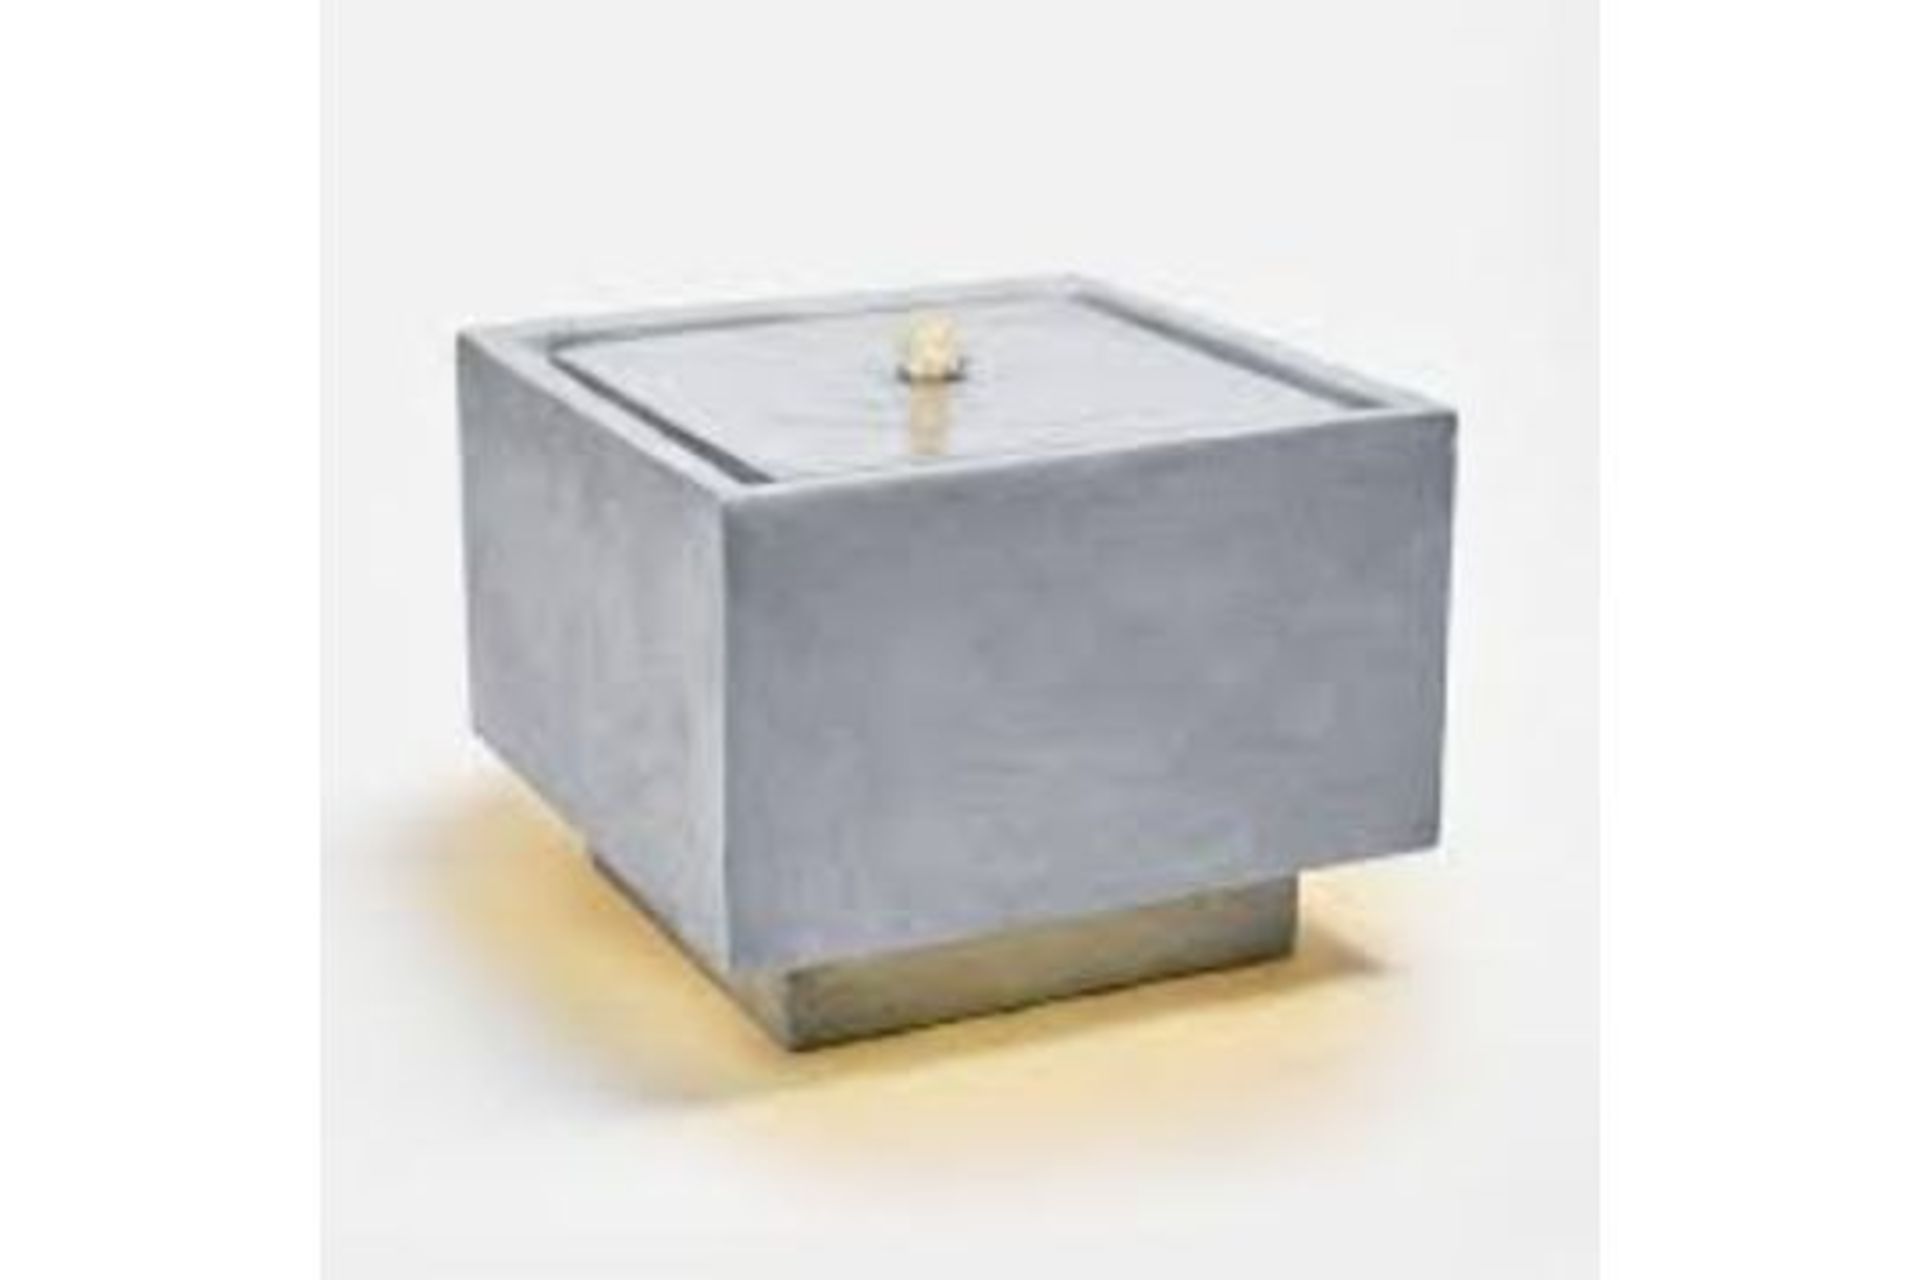 New & Boxed LED Grey Cube Water Feature. RRP £349.99. (REF718) Square Water Feature, Indoor/ - Image 4 of 4